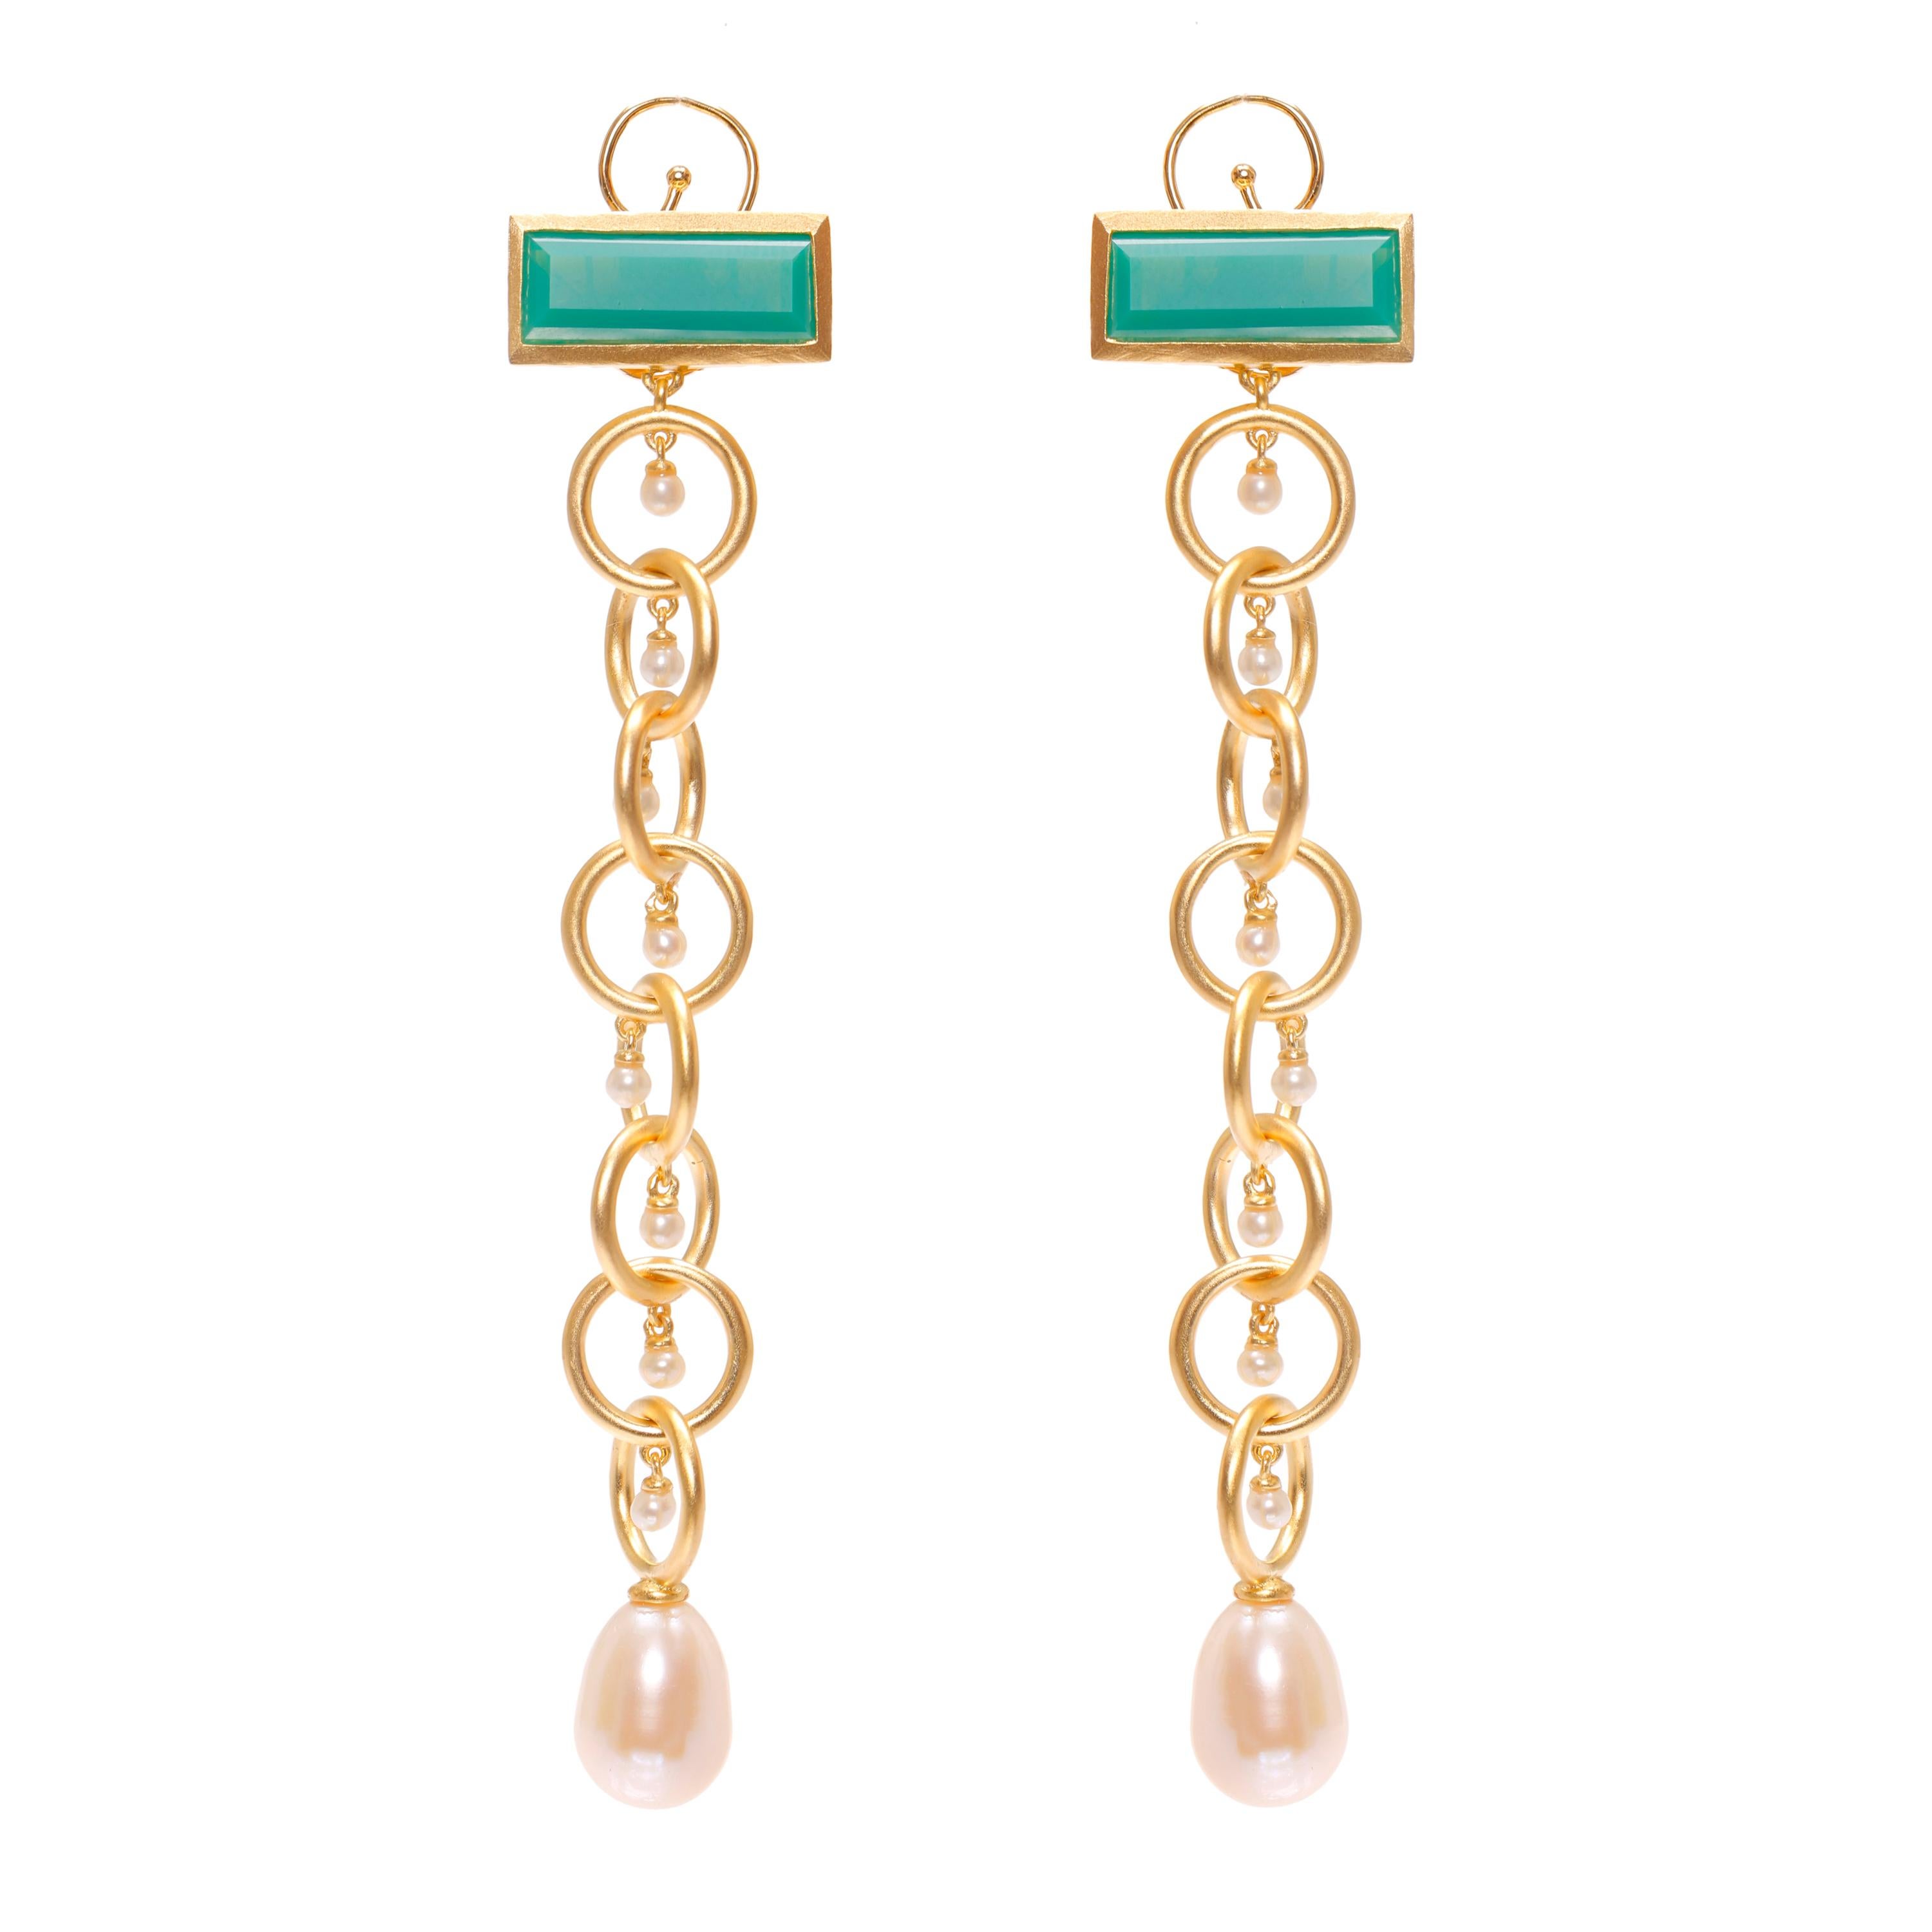 Ammanii Drop Earrings Vermeil Gold with Green Chrysoprase and  Pearls